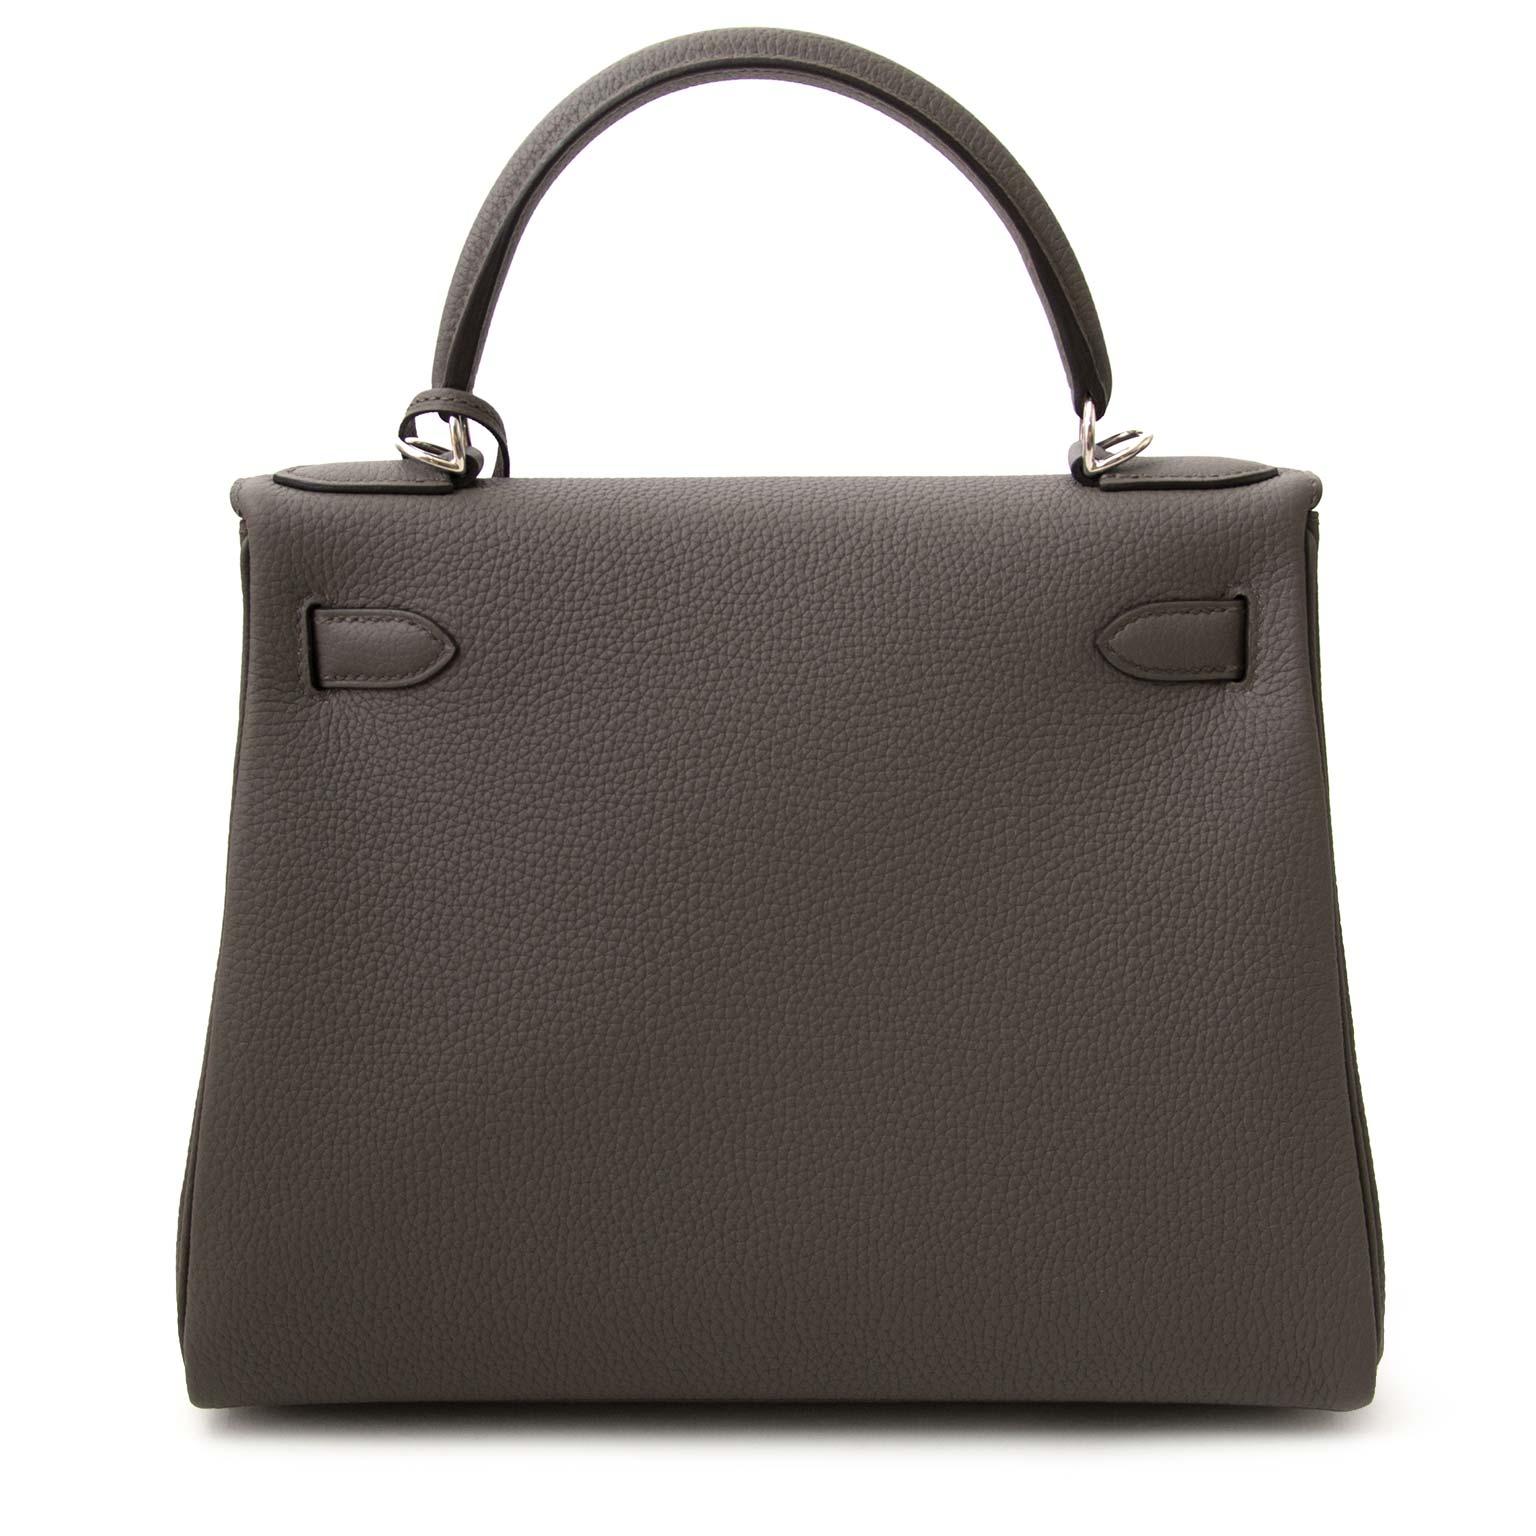 Never Used!

Never Used Hermes Kelly 28 Togo Etain 

This Hermès Kelly in timeless etain is a real statement piece.

The Kelly bag is made out of togo leather which is almost entirely scratch resistant and its grainy smooth texture is very